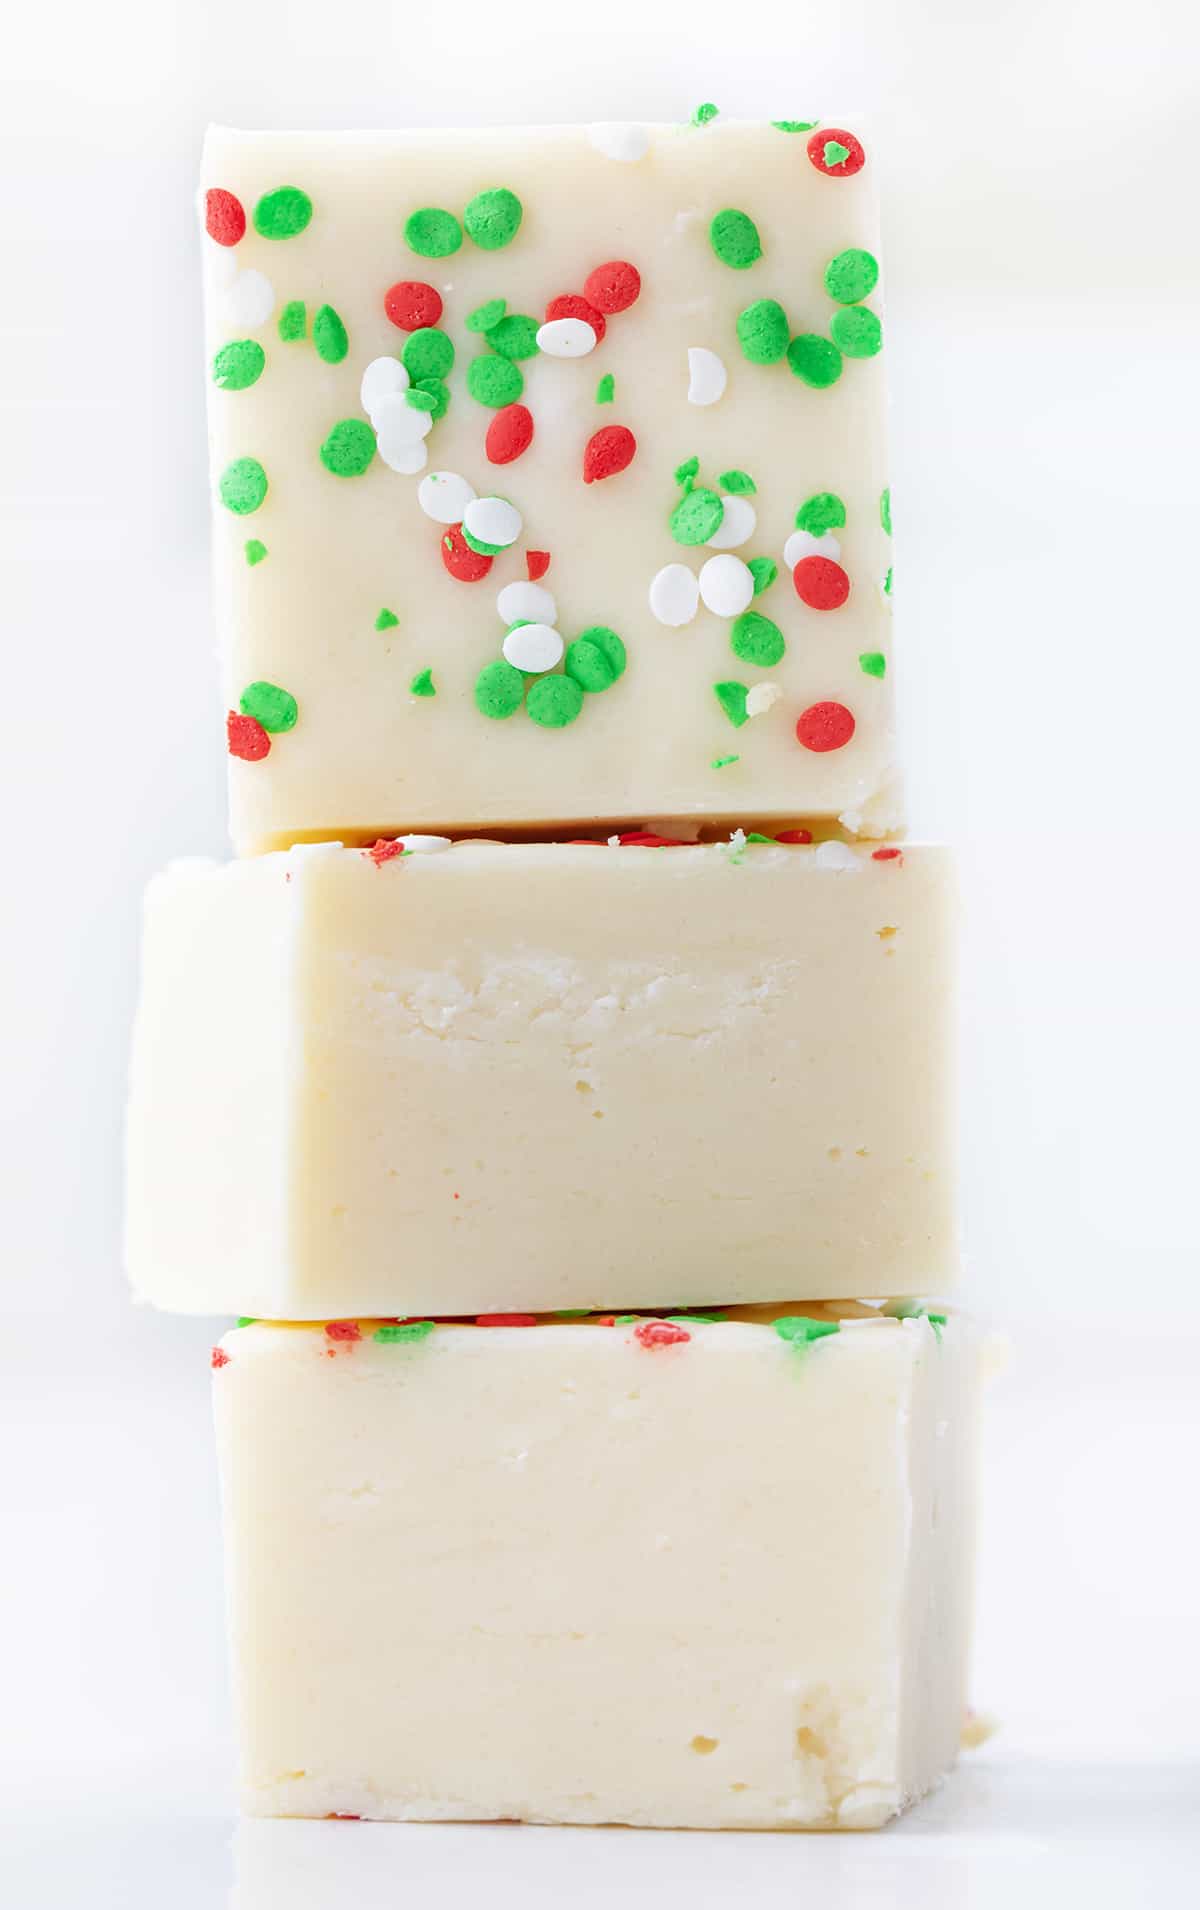 Stack of Pieces of Sugar Cookie Fudge on a White Counter.